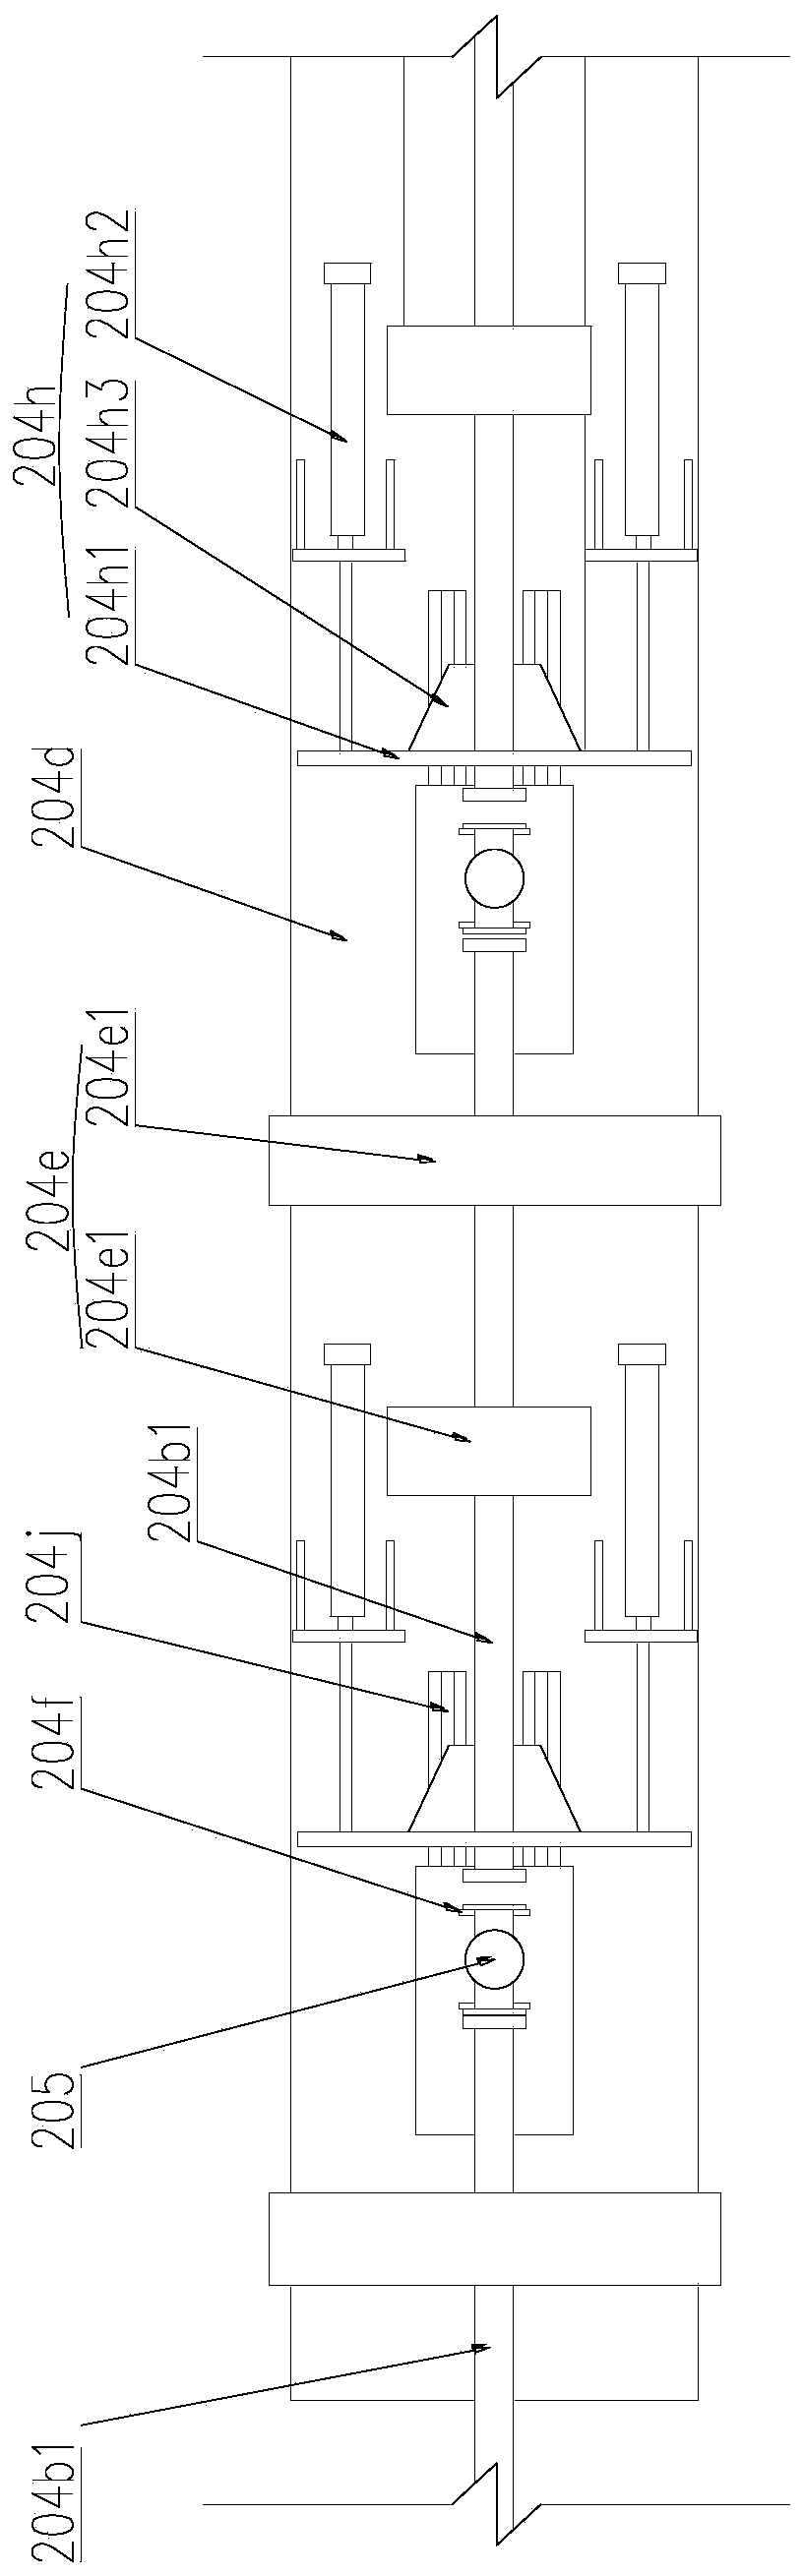 Flowmeter calibration system with multiple calibration lines and calibration method based on system